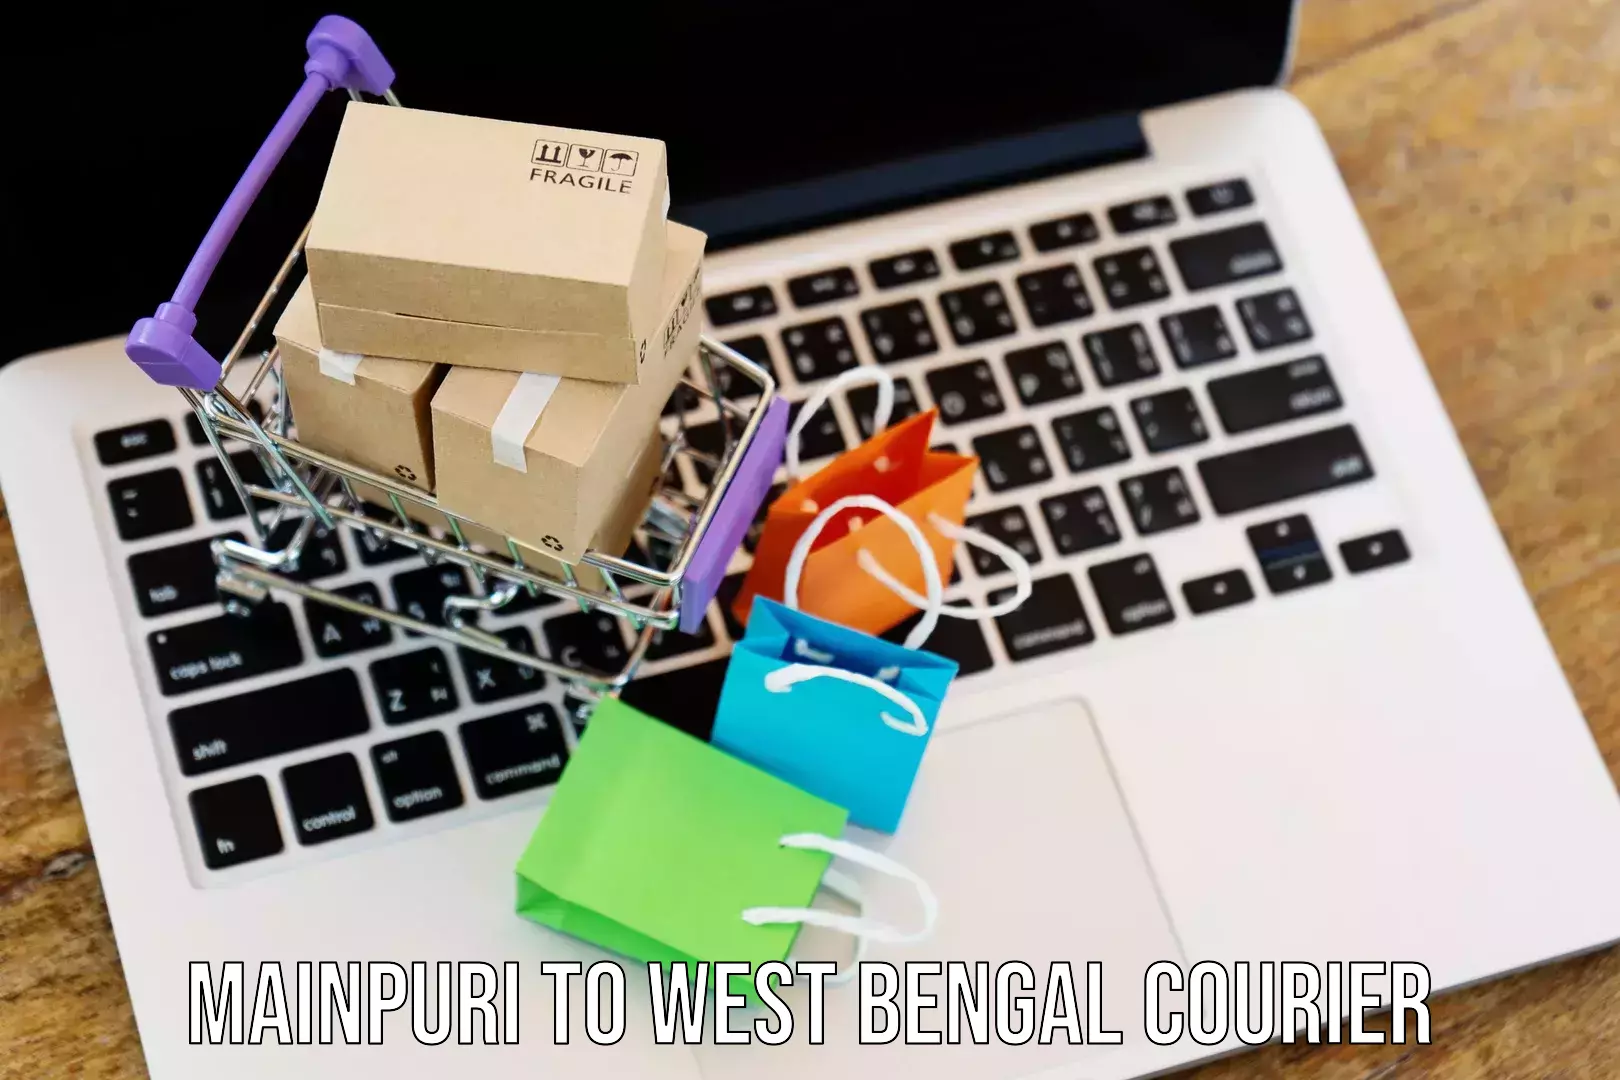 Next-day delivery options Mainpuri to West Bengal